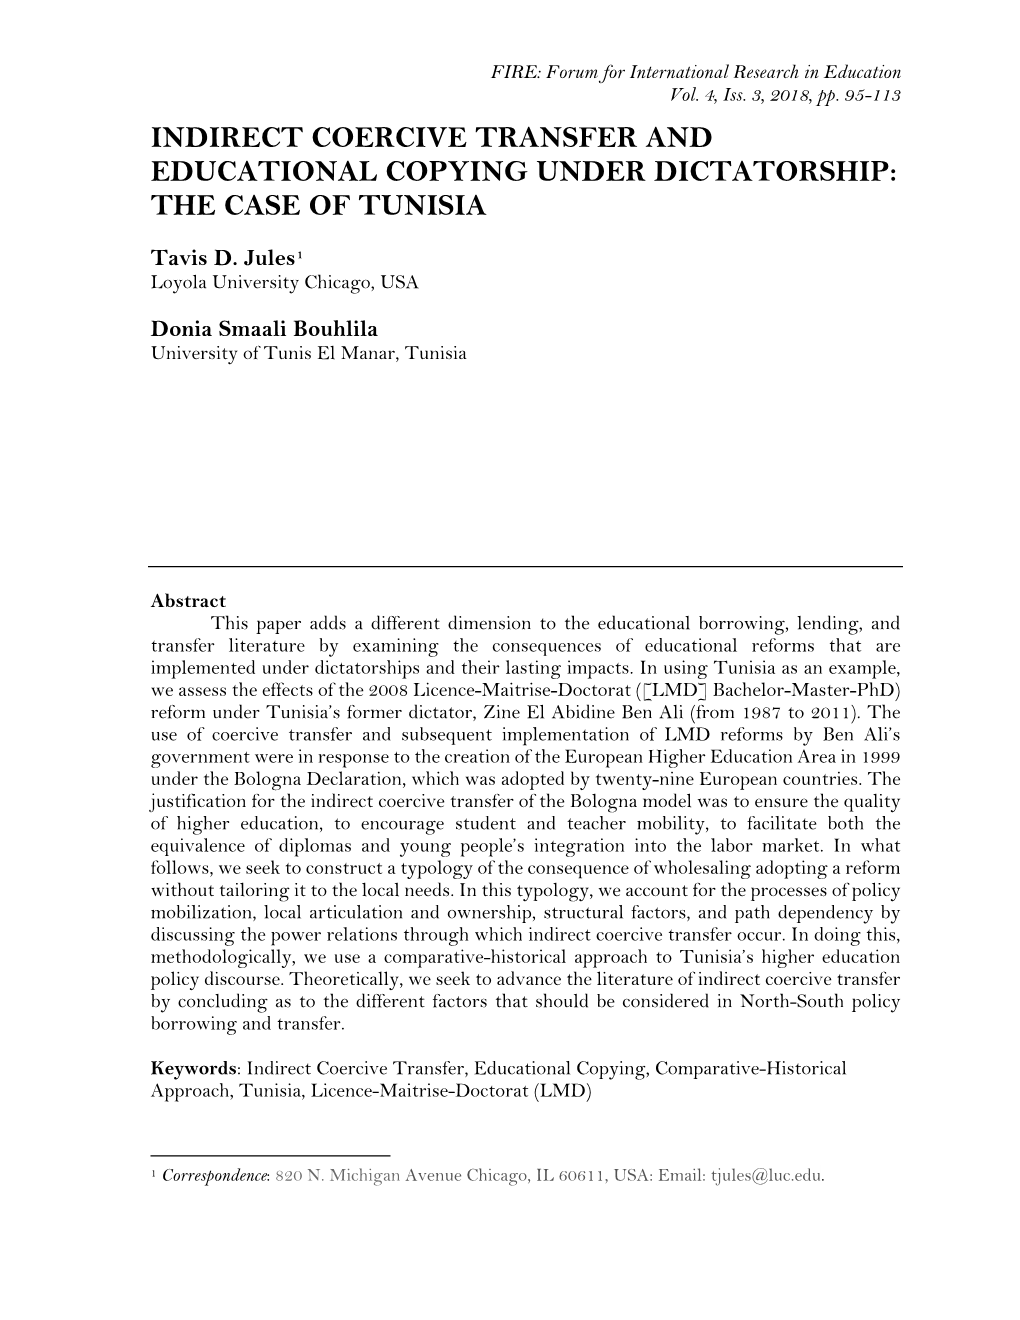 Indirect Coercive Transfer and Educational Copying Under Dictatorship: the Case of Tunisia